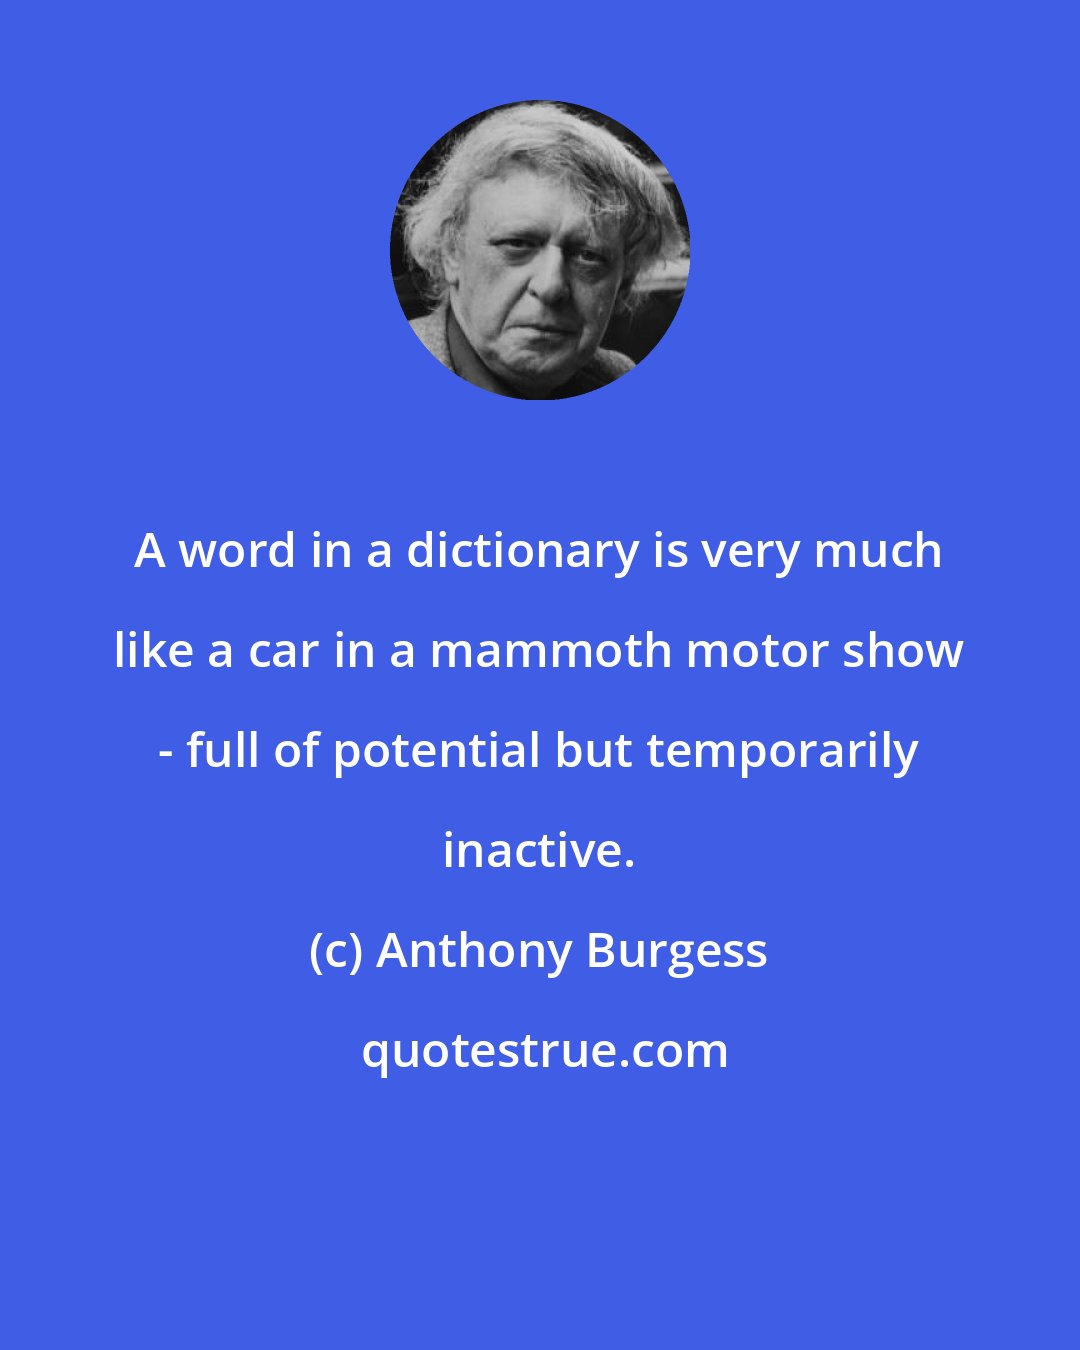 Anthony Burgess: A word in a dictionary is very much like a car in a mammoth motor show - full of potential but temporarily inactive.